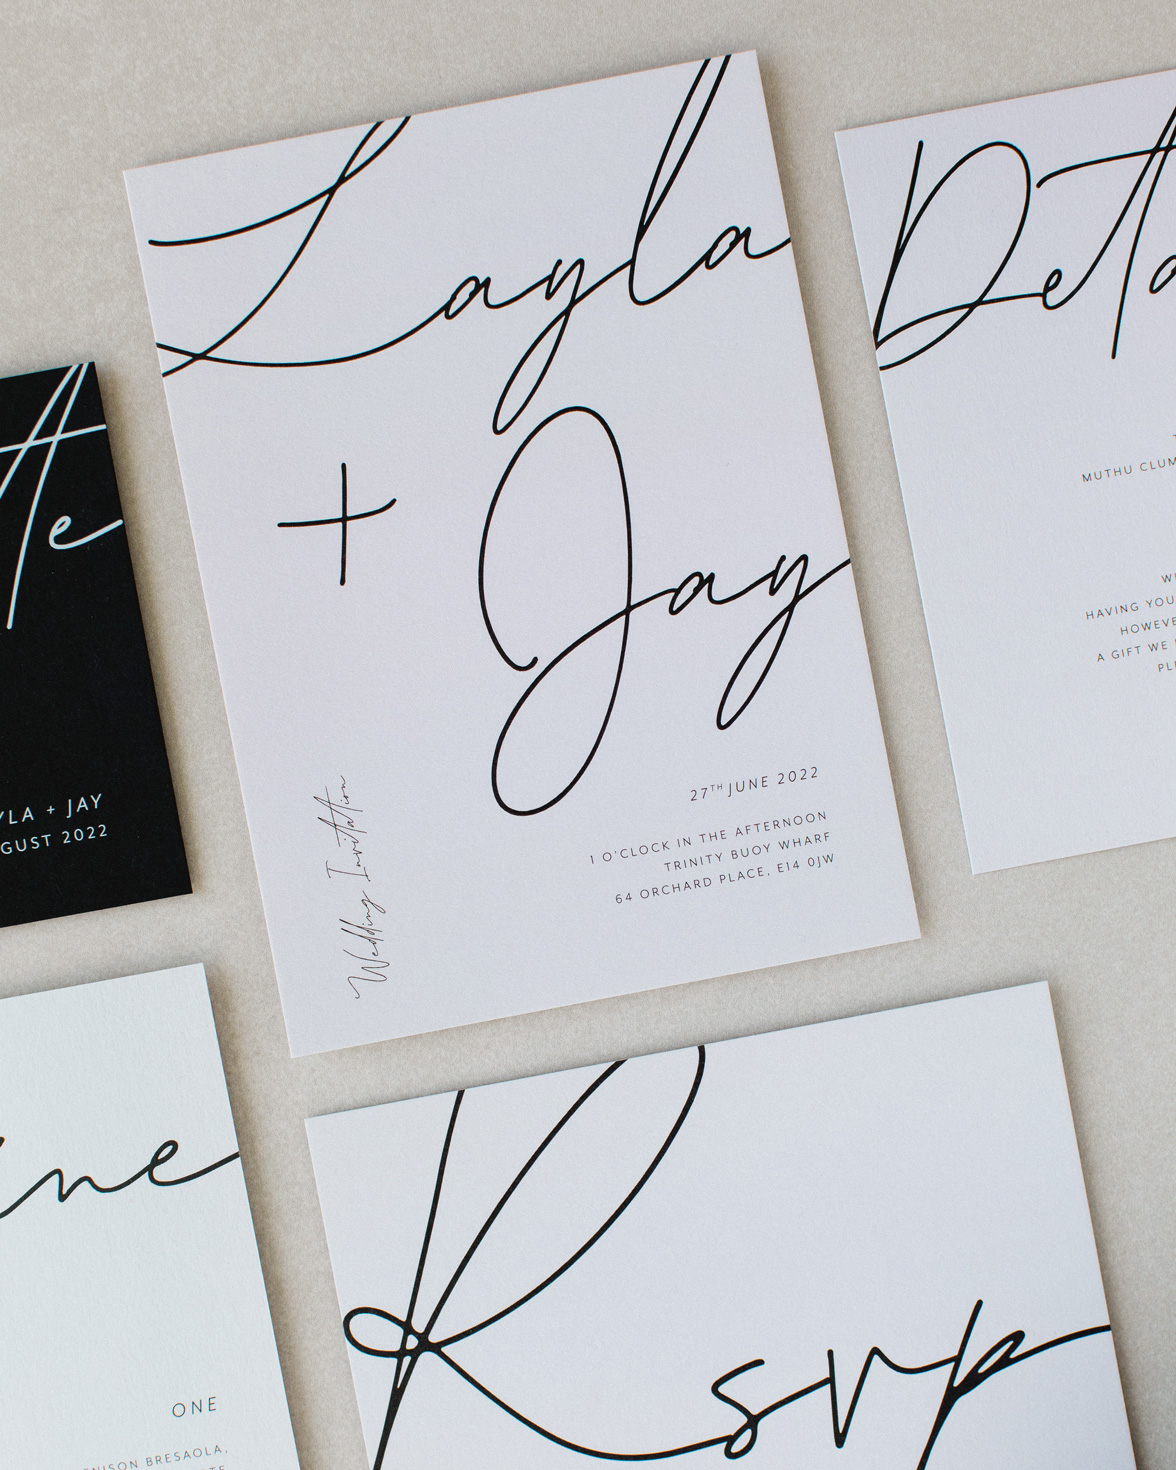 Libre Firma Wedding stationery collection overview